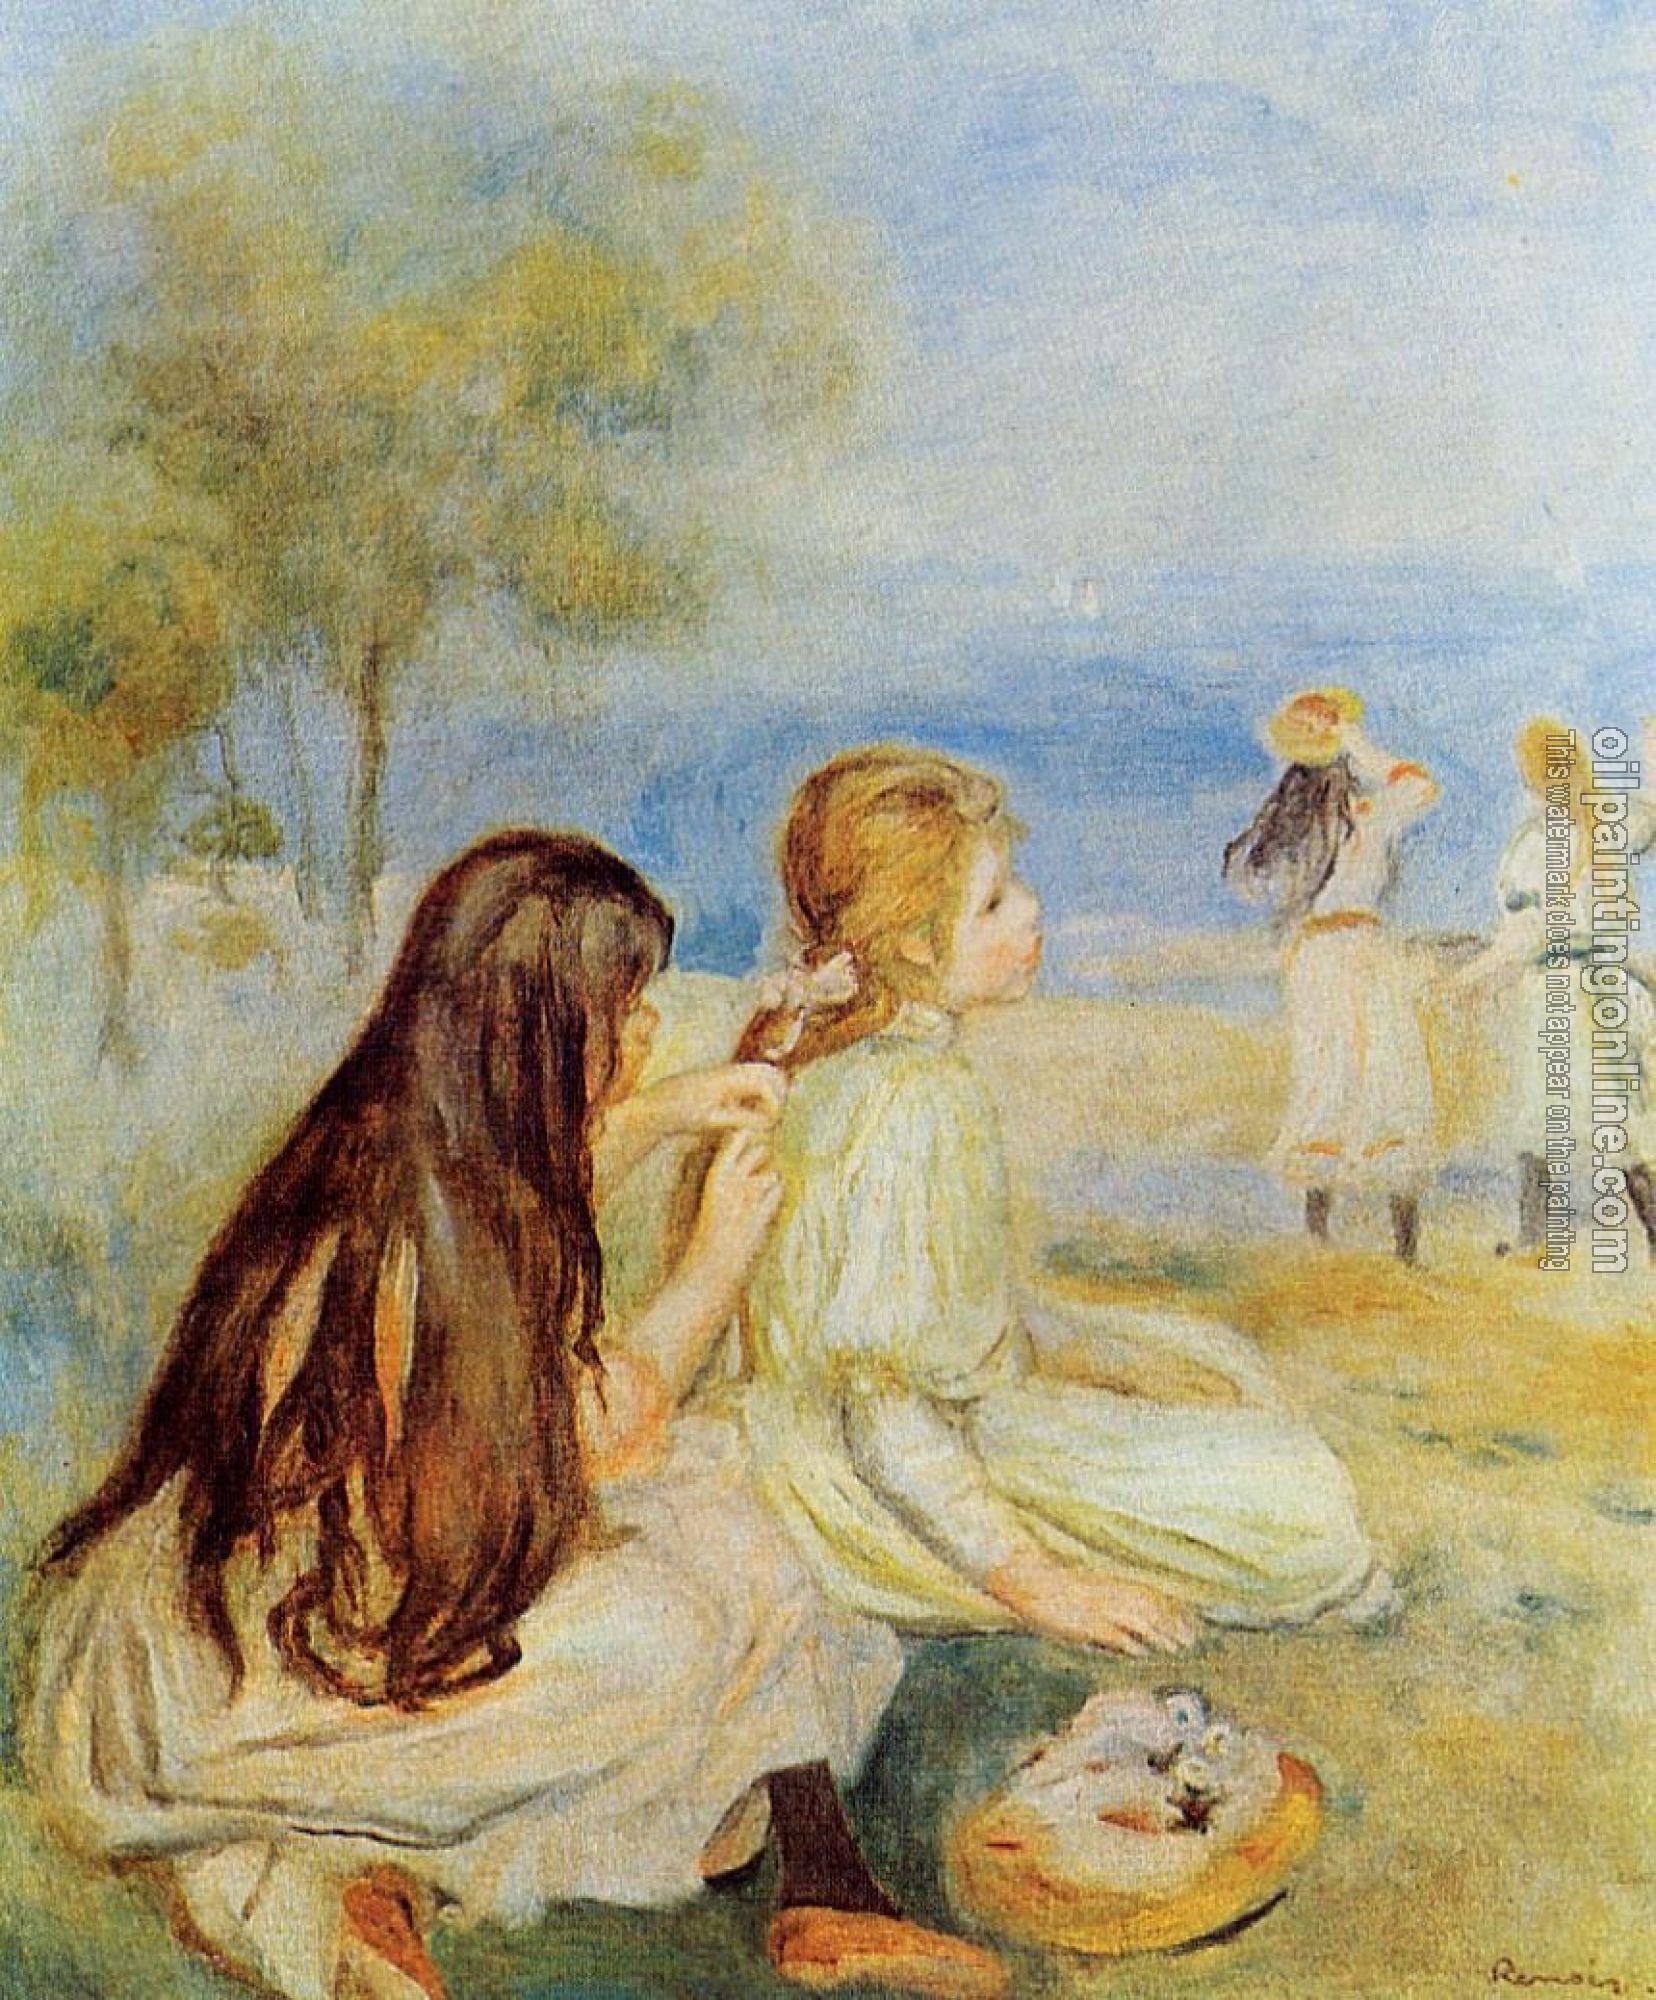 Renoir, Pierre Auguste - Young Girls by the Sea